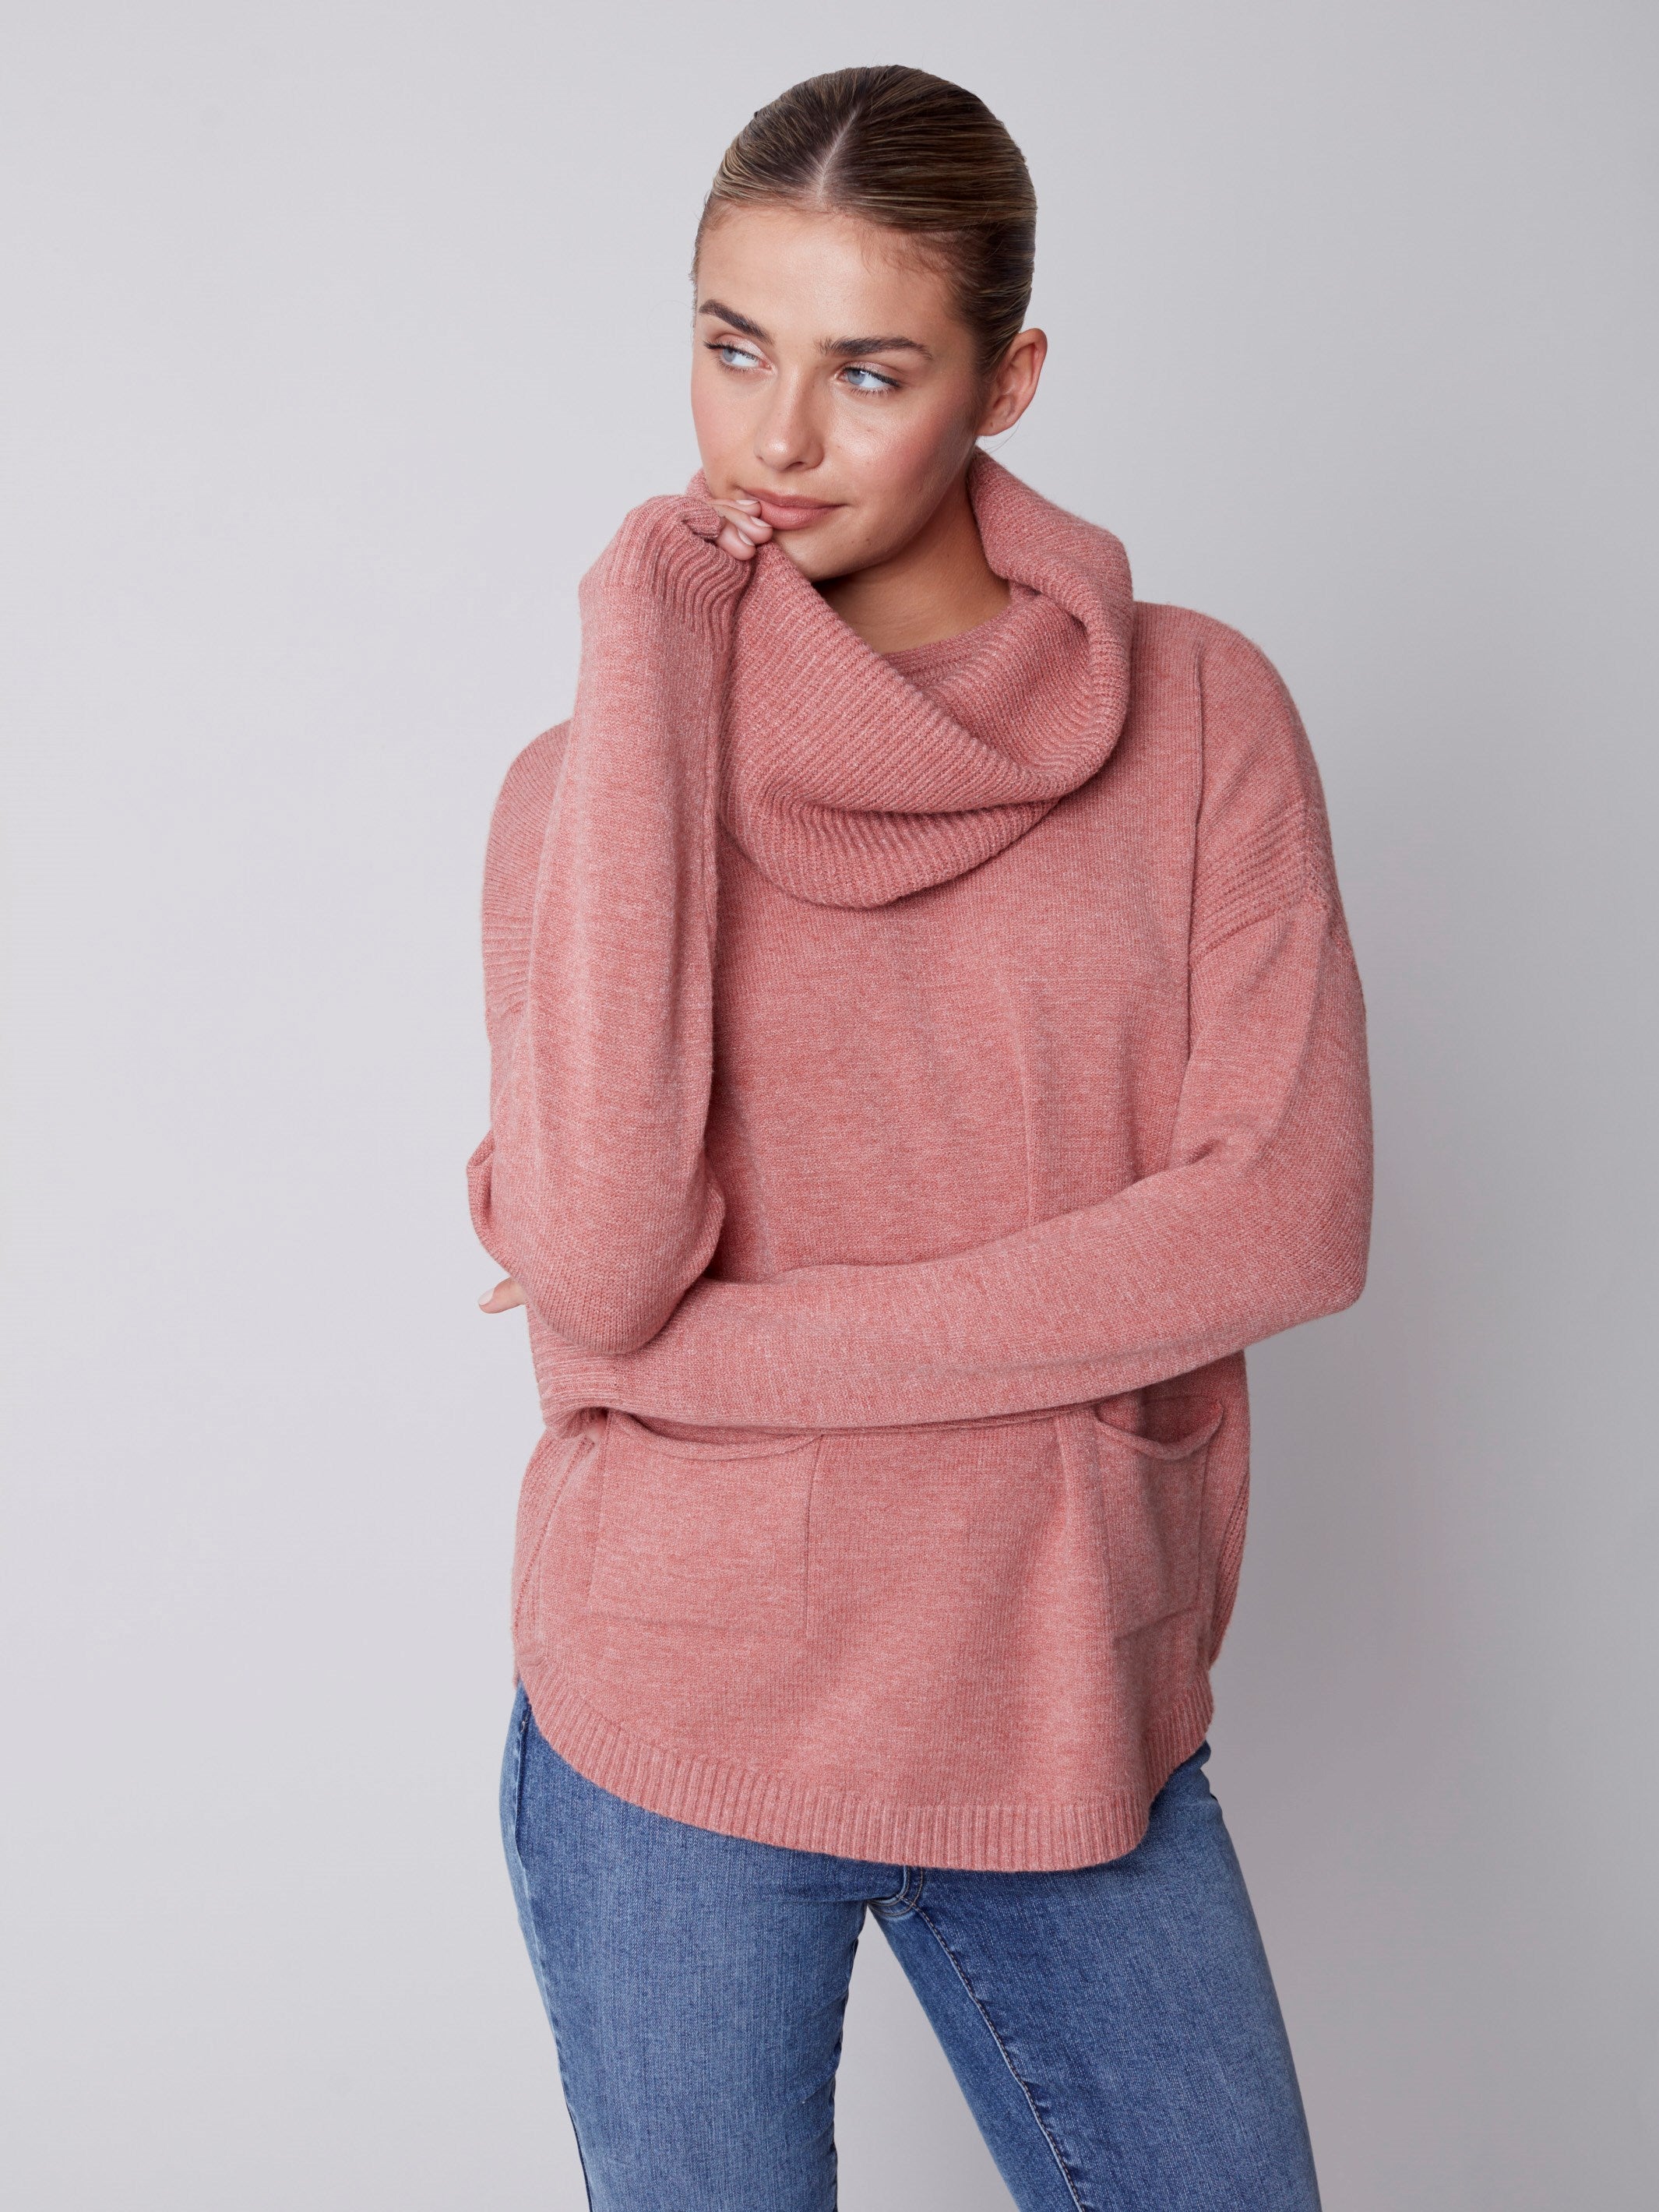 Sweater with Removable Scarf - Cinnamon